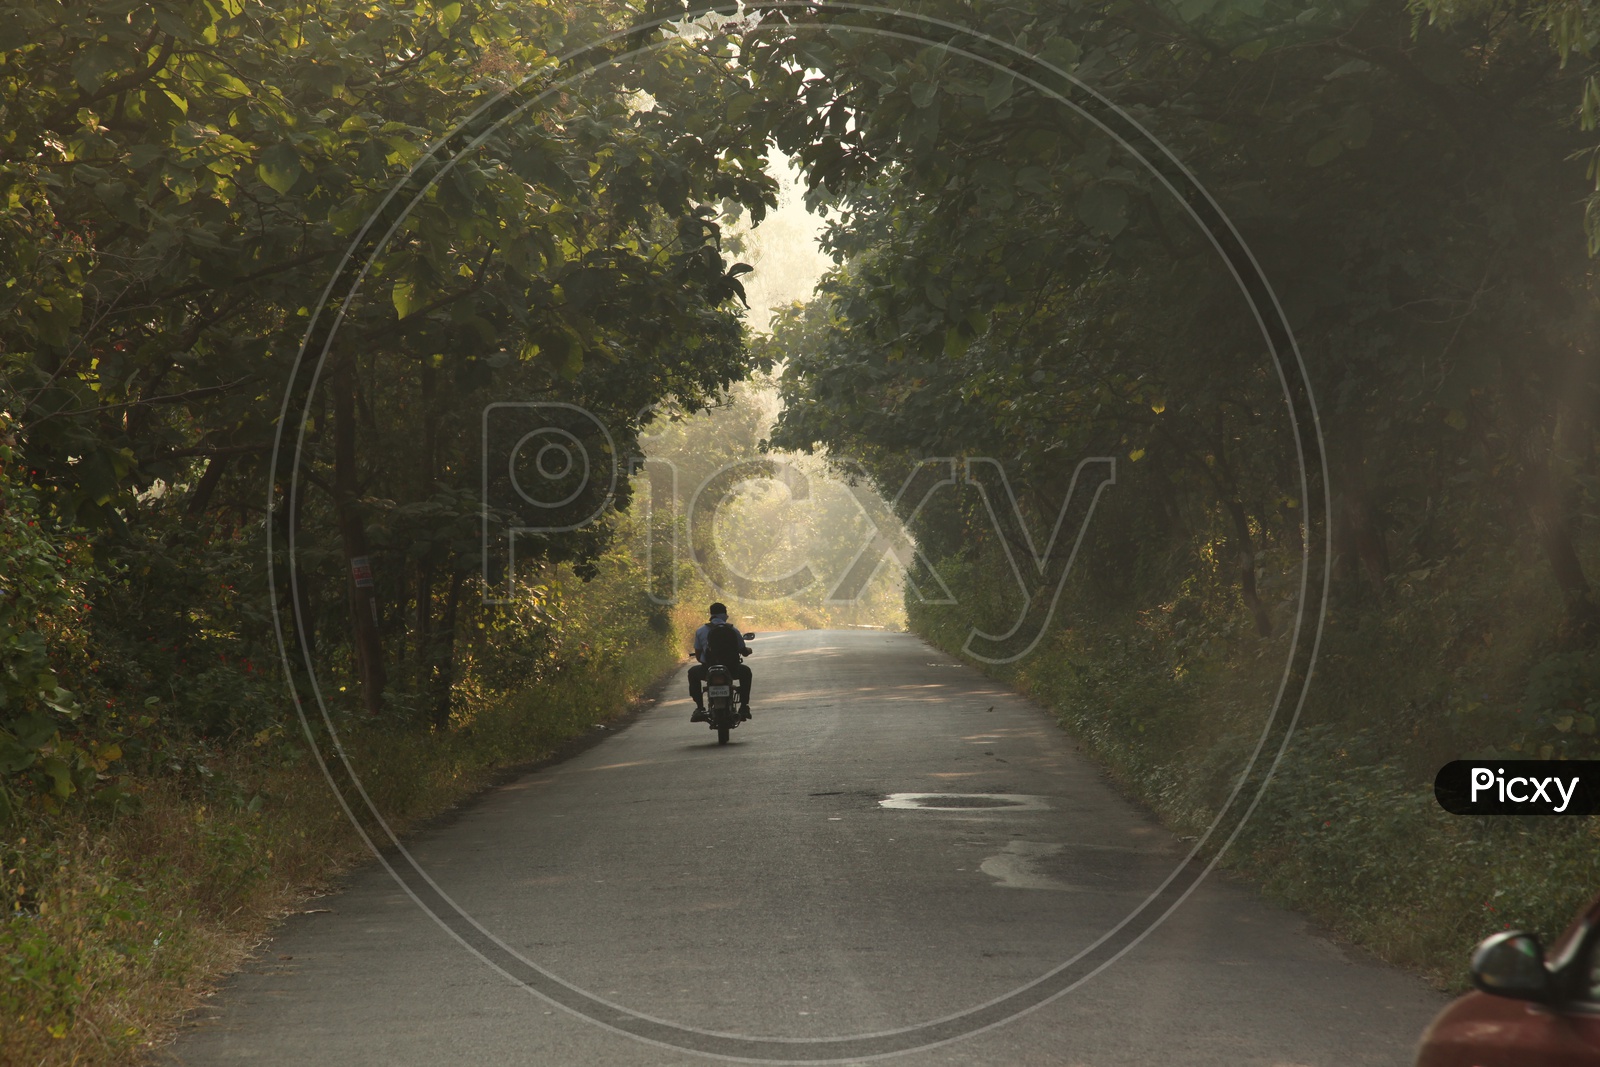 A man riding motorcycle on the road